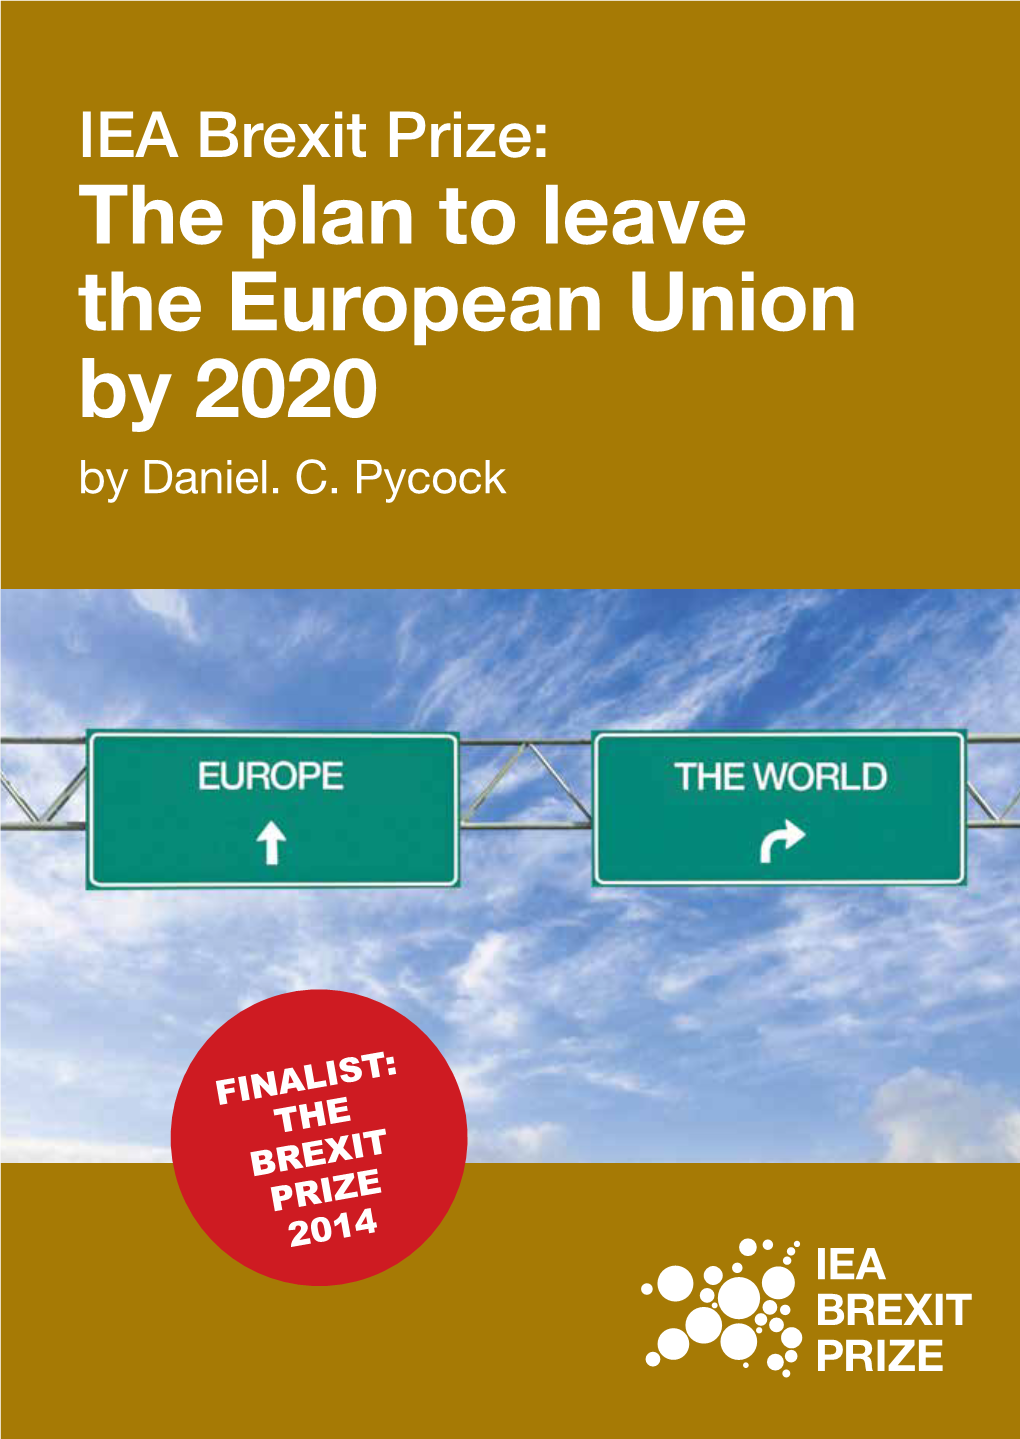 IEA Brexit Prize: the Plan to Leave the European Union by 2020 by Daniel